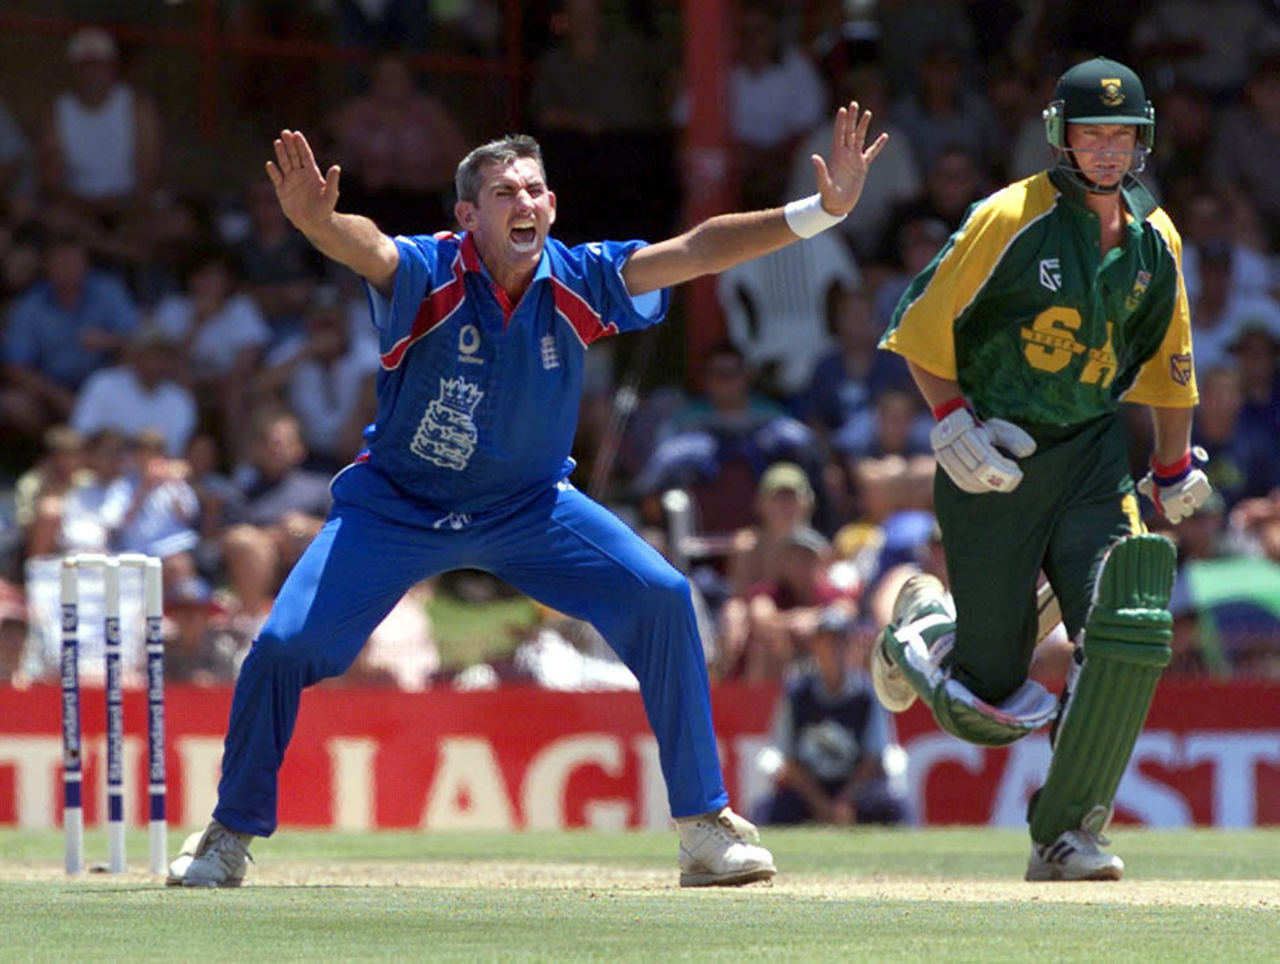 Andrew Caddick appeals for the wicket of Pieter Strydom, South Africa v England, second ODI, Bloemfontein, January 23, 2000